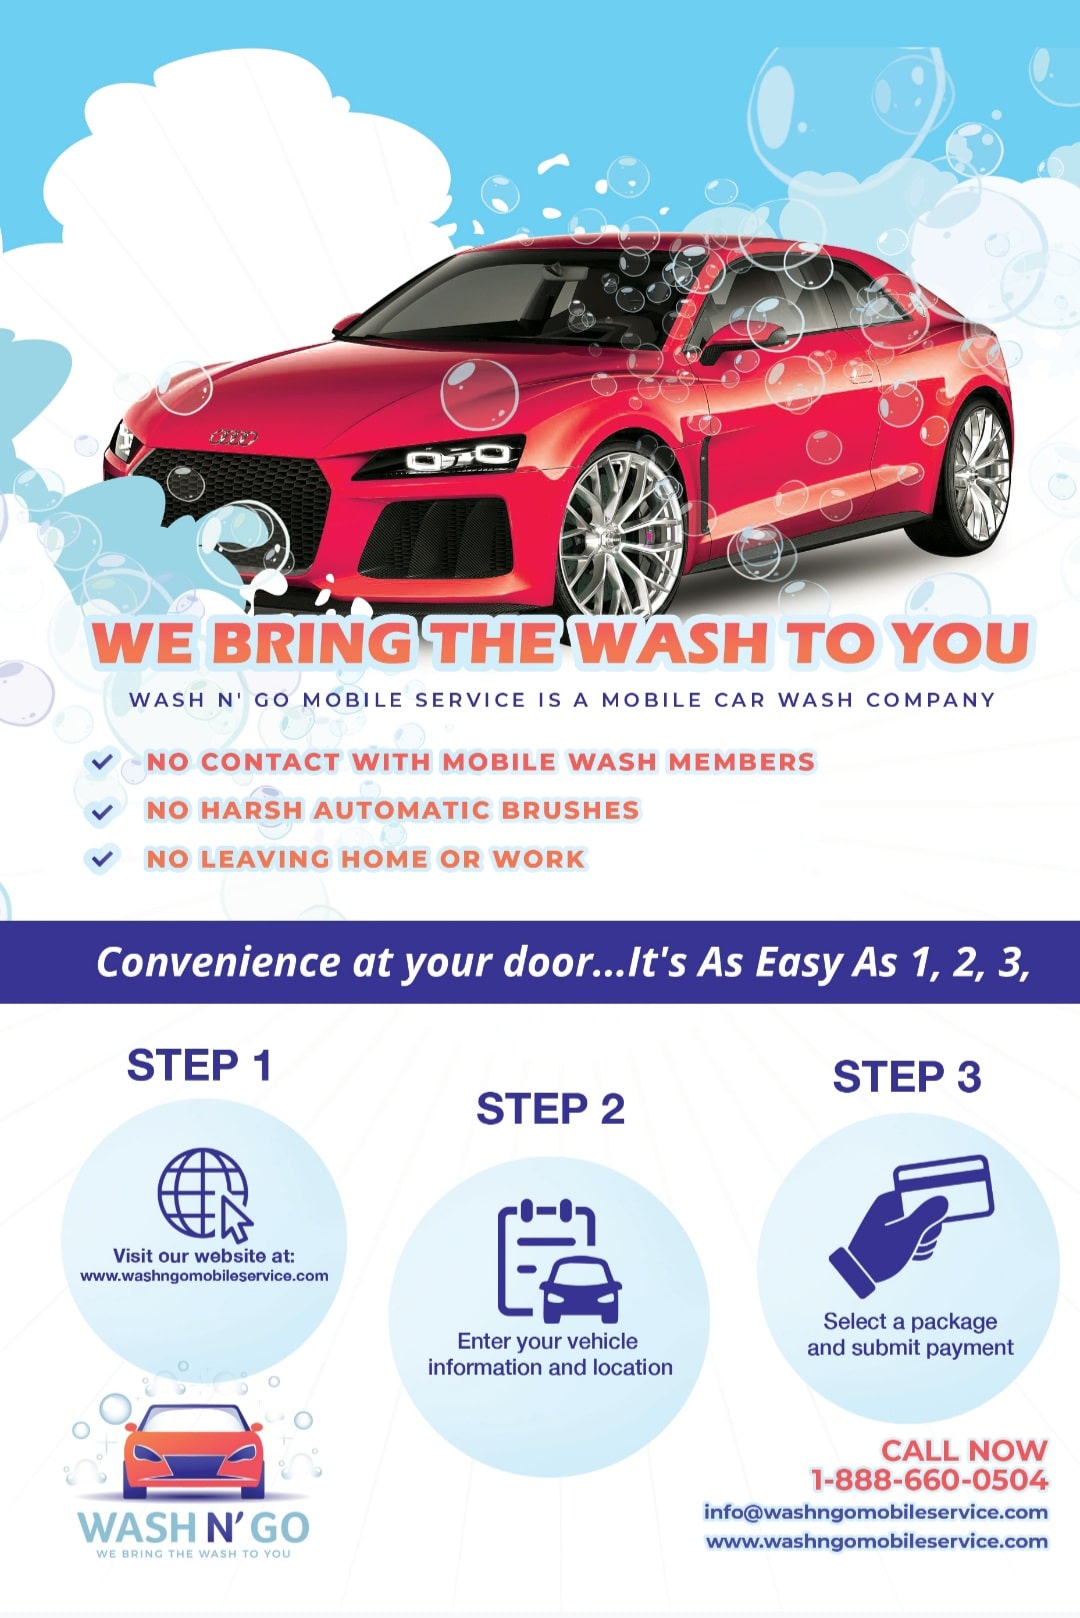 A flyer advertising a high-quality car wash service conveniently located near apartments in The Woodlands, TX.